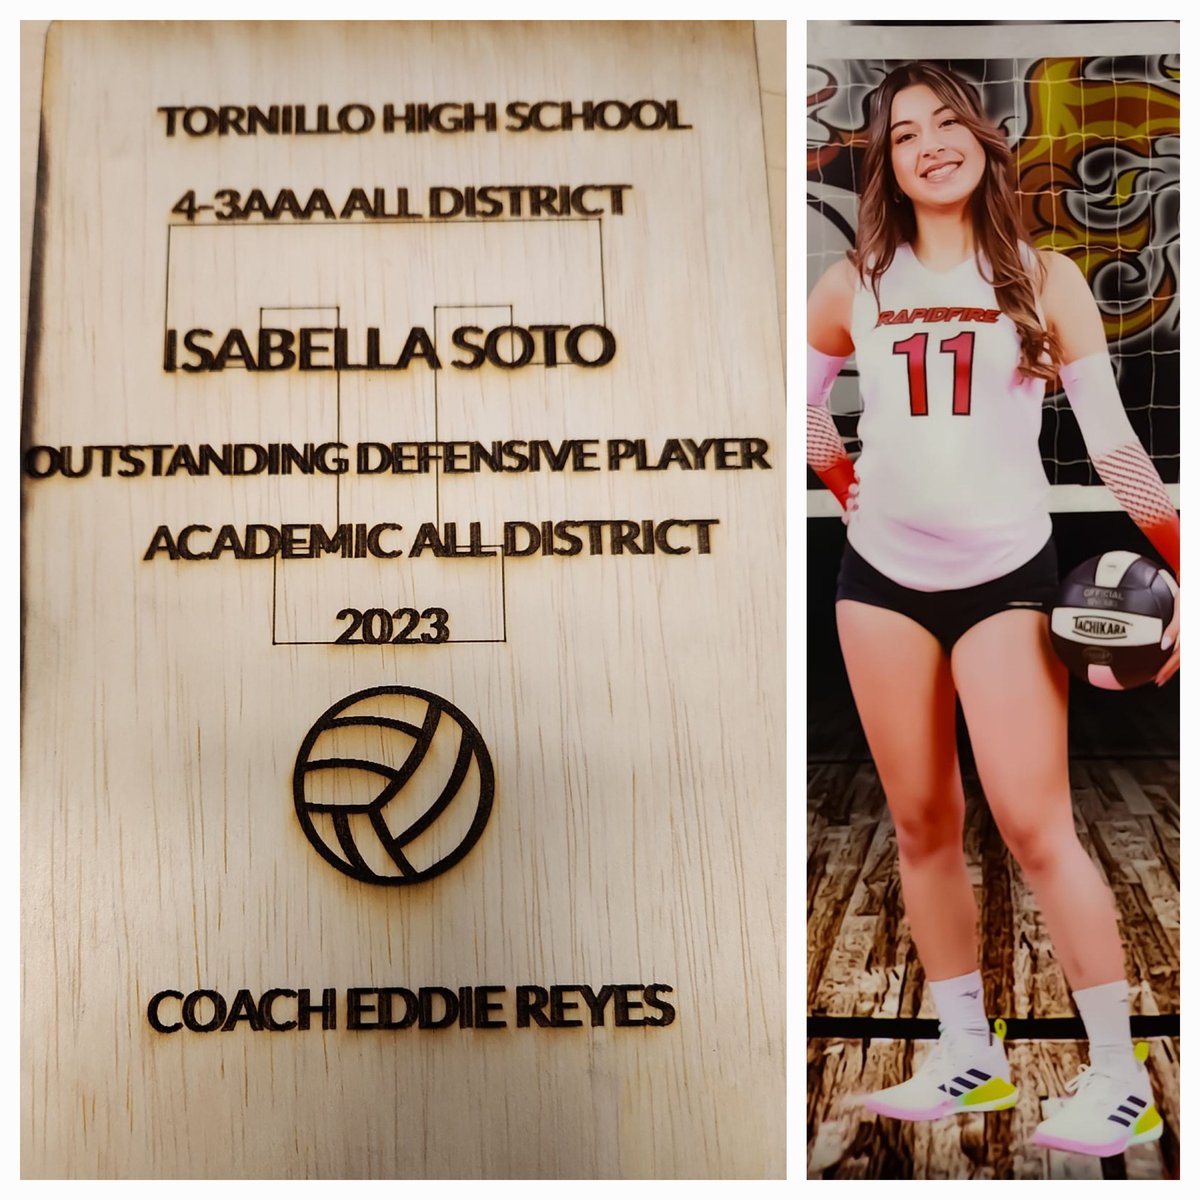 Once a Coyote, always a Coyote. The memories she created with this team will last a lifetime. Thank you for all you did. @EddieRe95656009 don't forget to go watch her last year on her new journey. #classof2025 #tisdproud #socorrohighschool